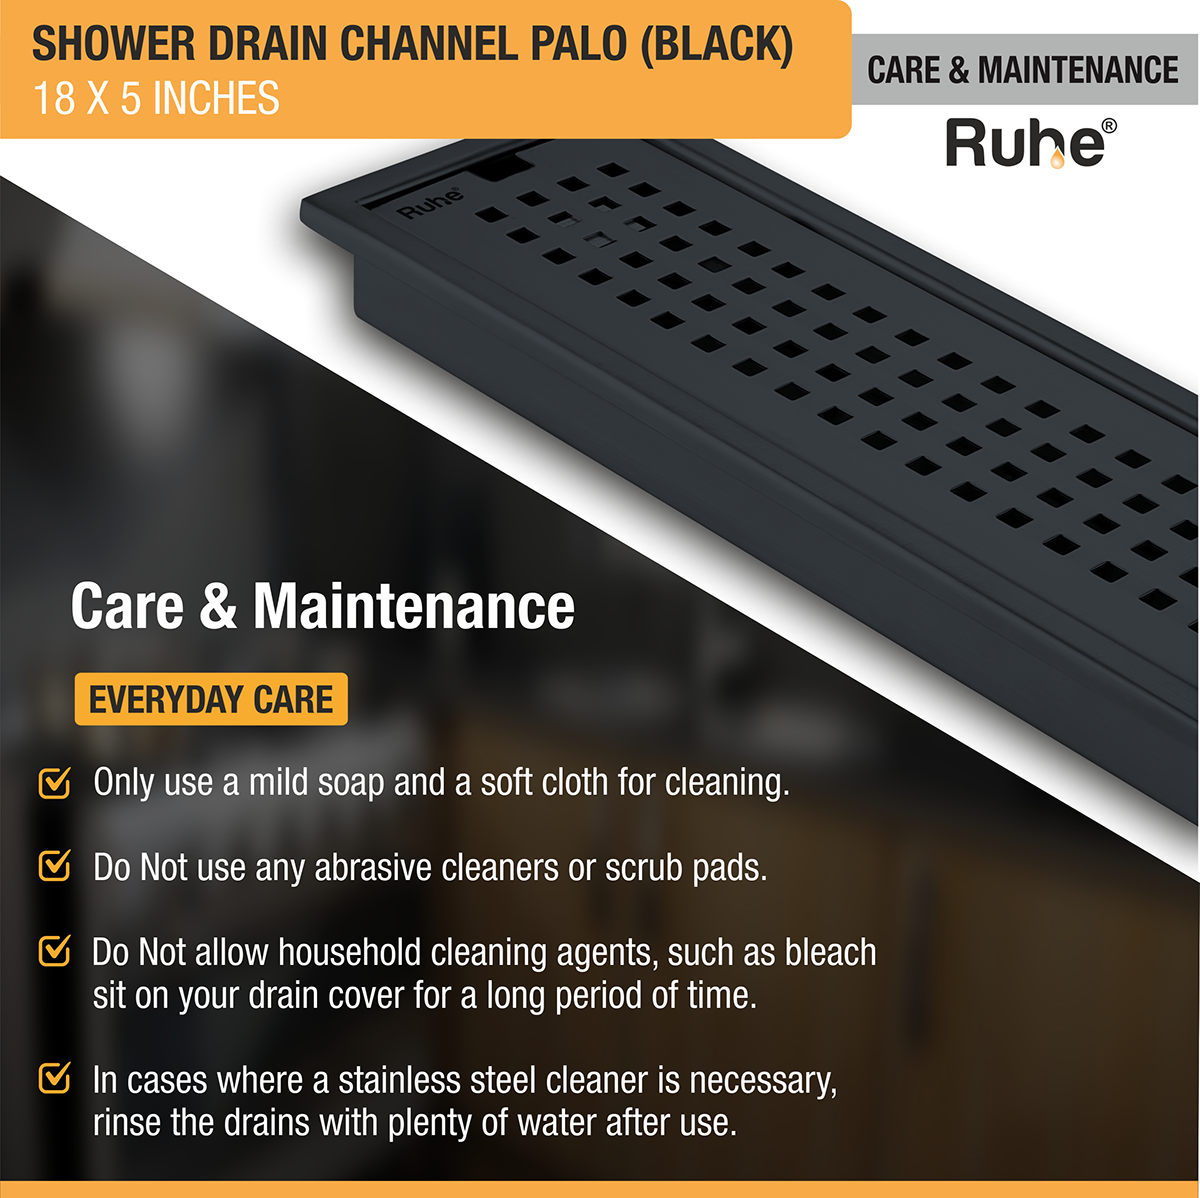 Palo Shower Drain Channel (18 x 5 Inches) Black PVD Coated care and maintenance